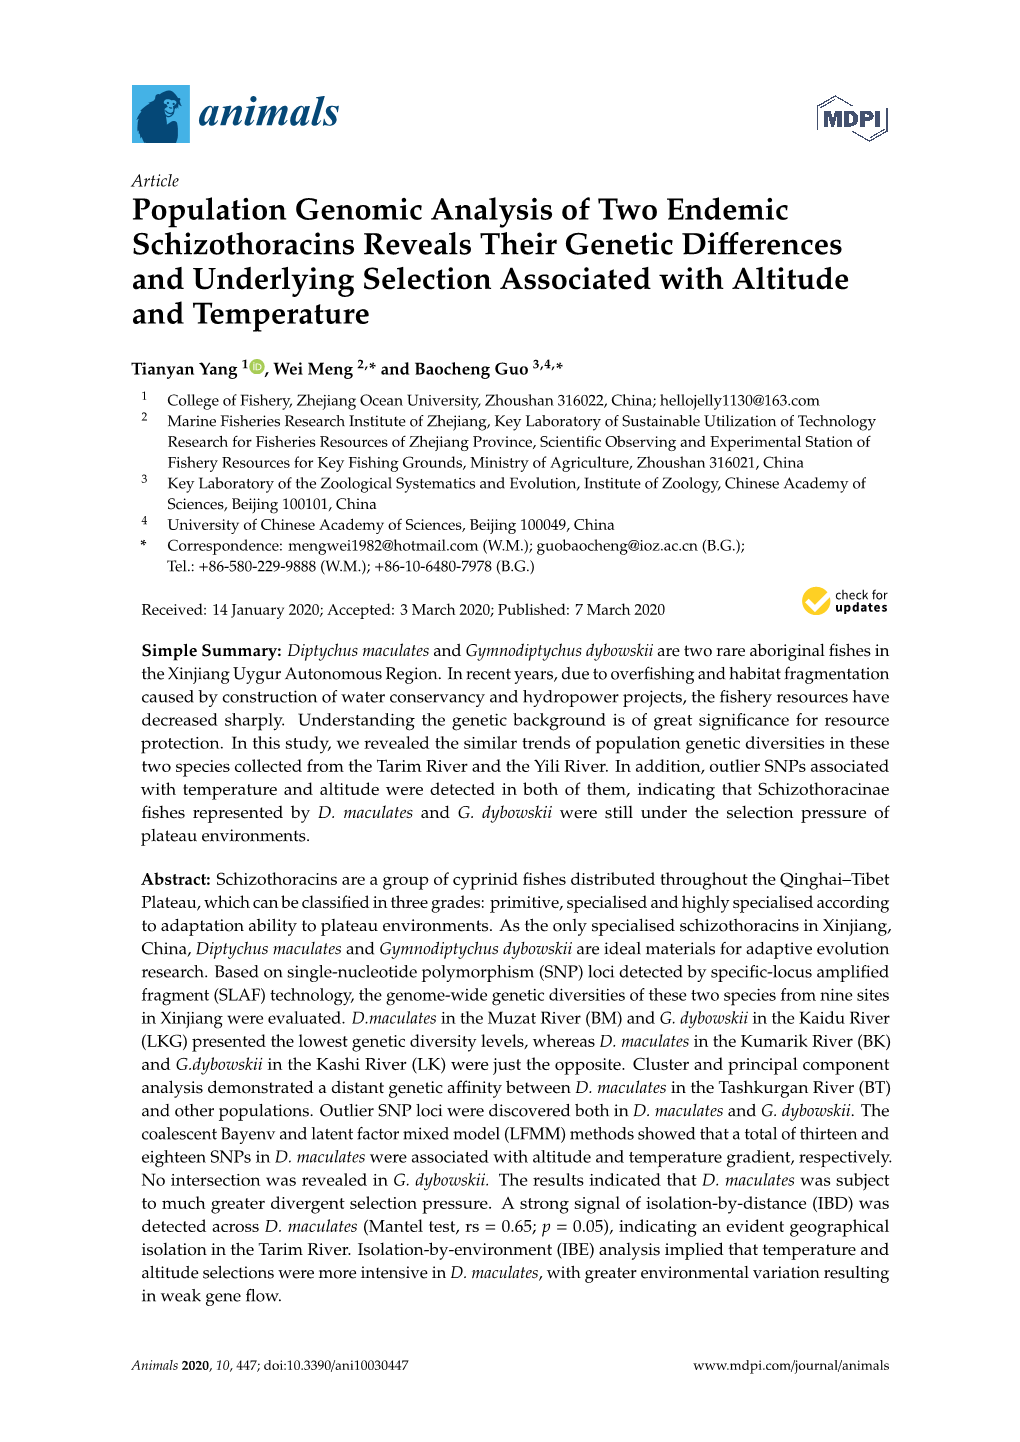 Population Genomic Analysis of Two Endemic Schizothoracins Reveals Their Genetic Diﬀerences and Underlying Selection Associated with Altitude and Temperature